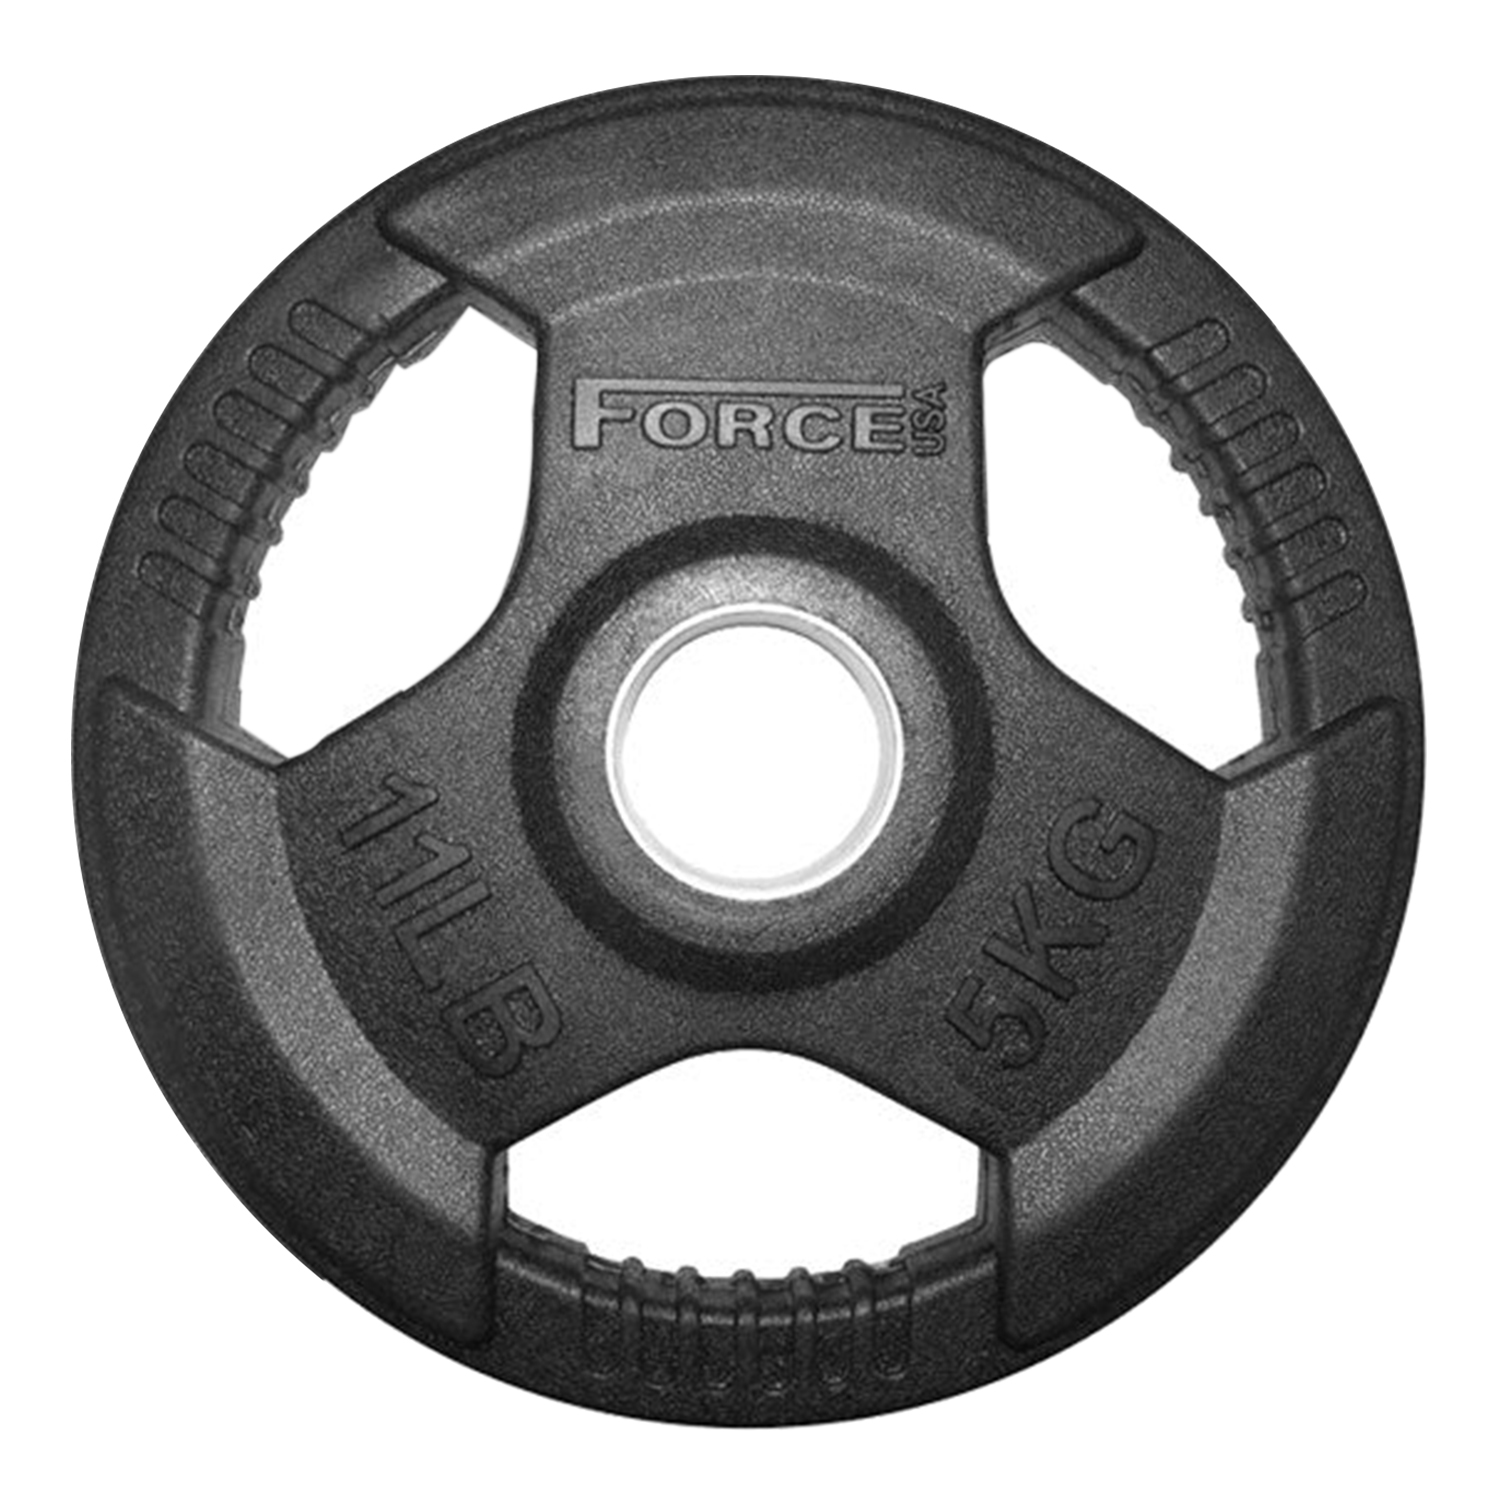 Force USA Rubber Coated Olympic Weight Plate, 5 Kg